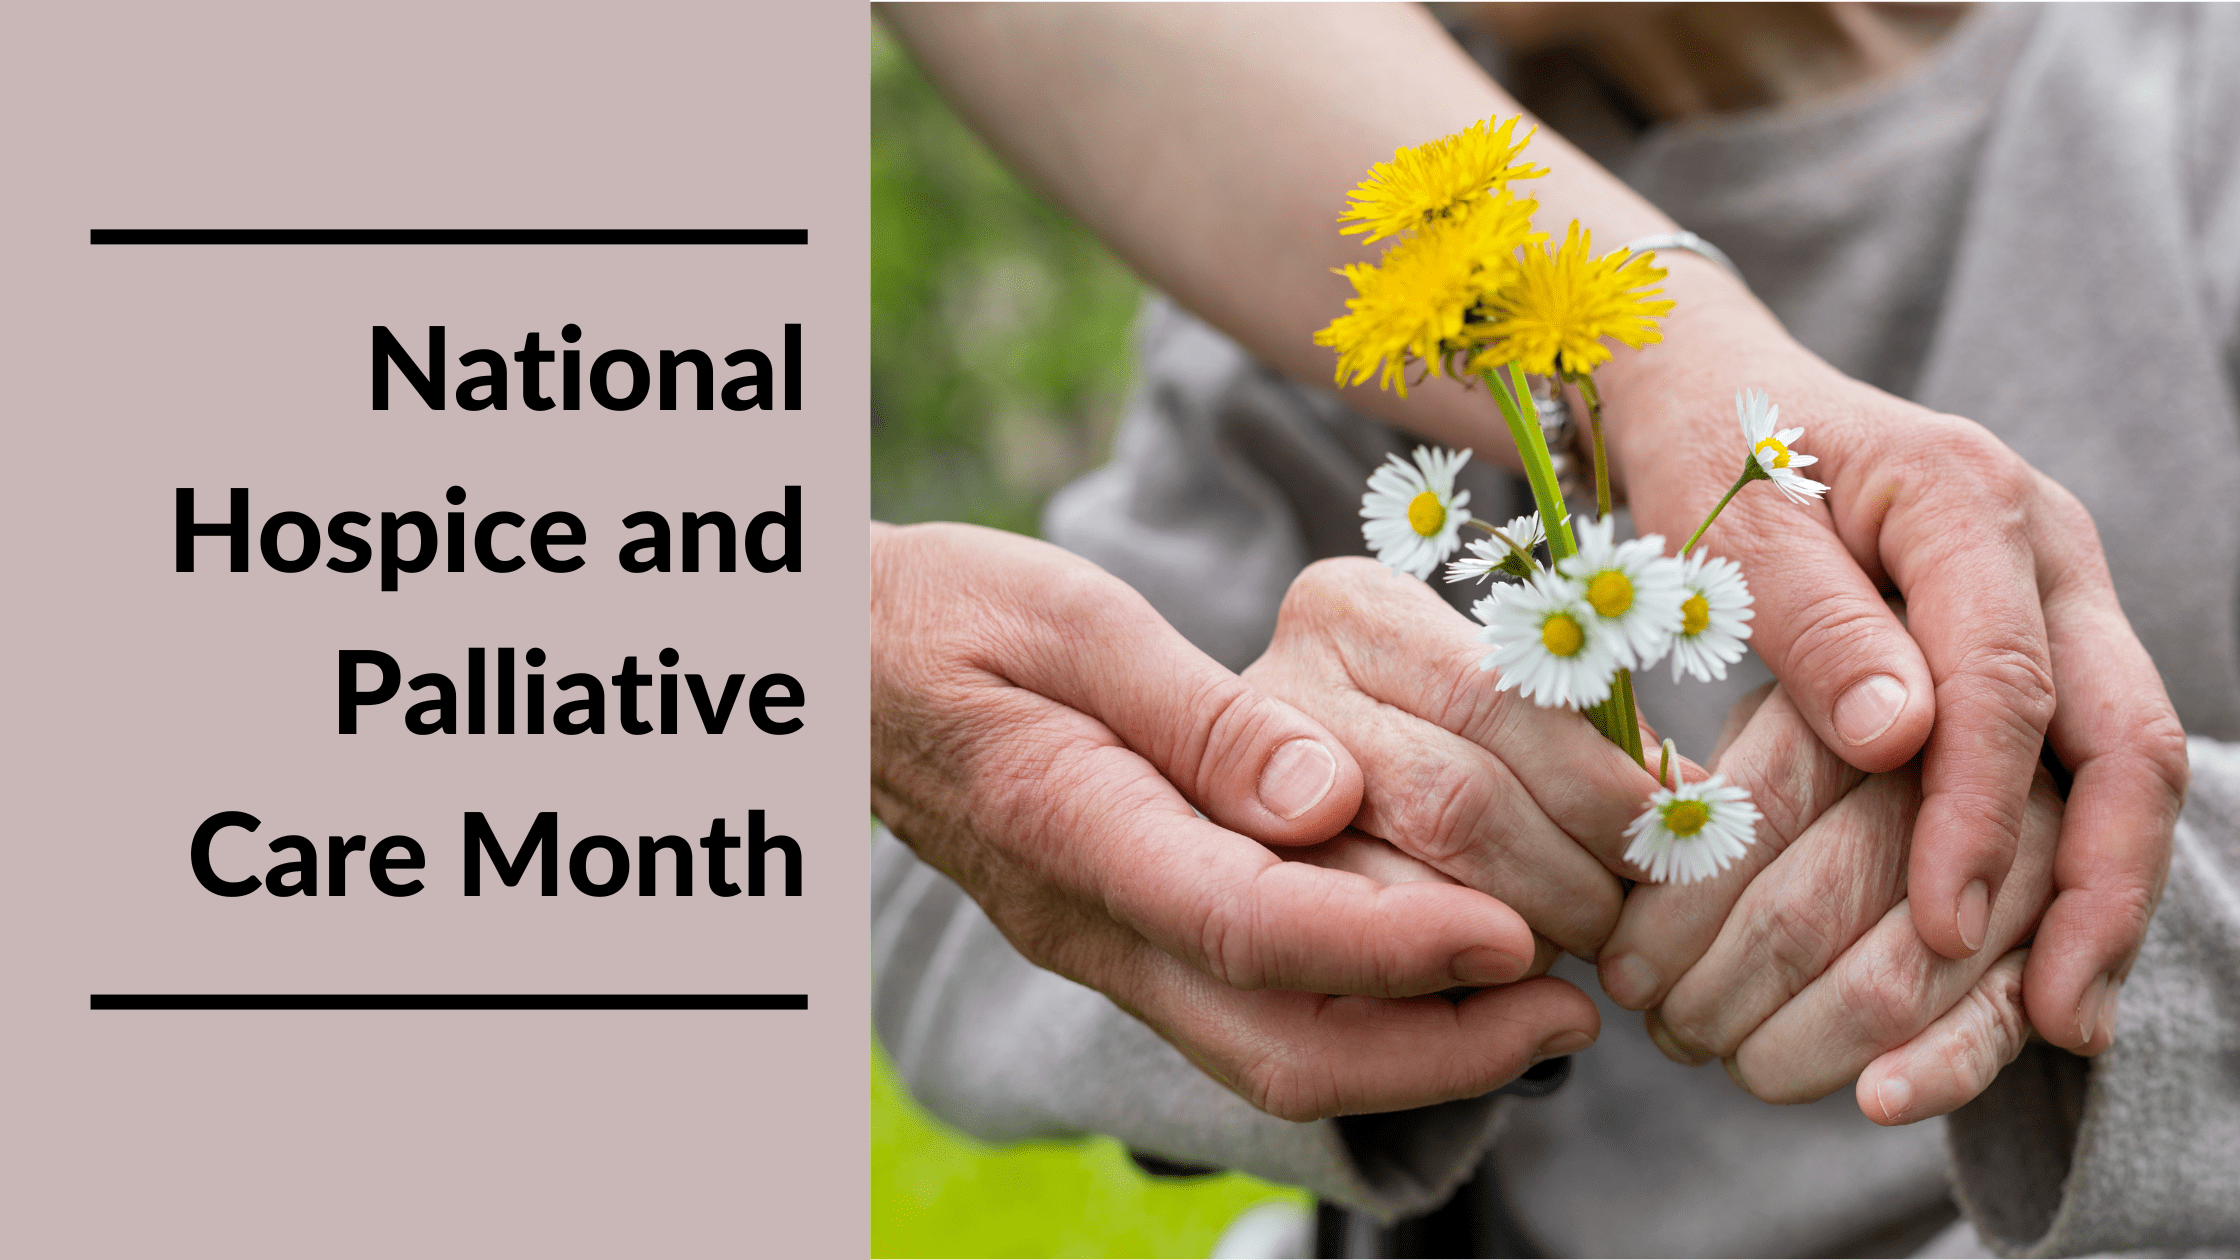 National Hospice and Palliative Care Month Featured Image